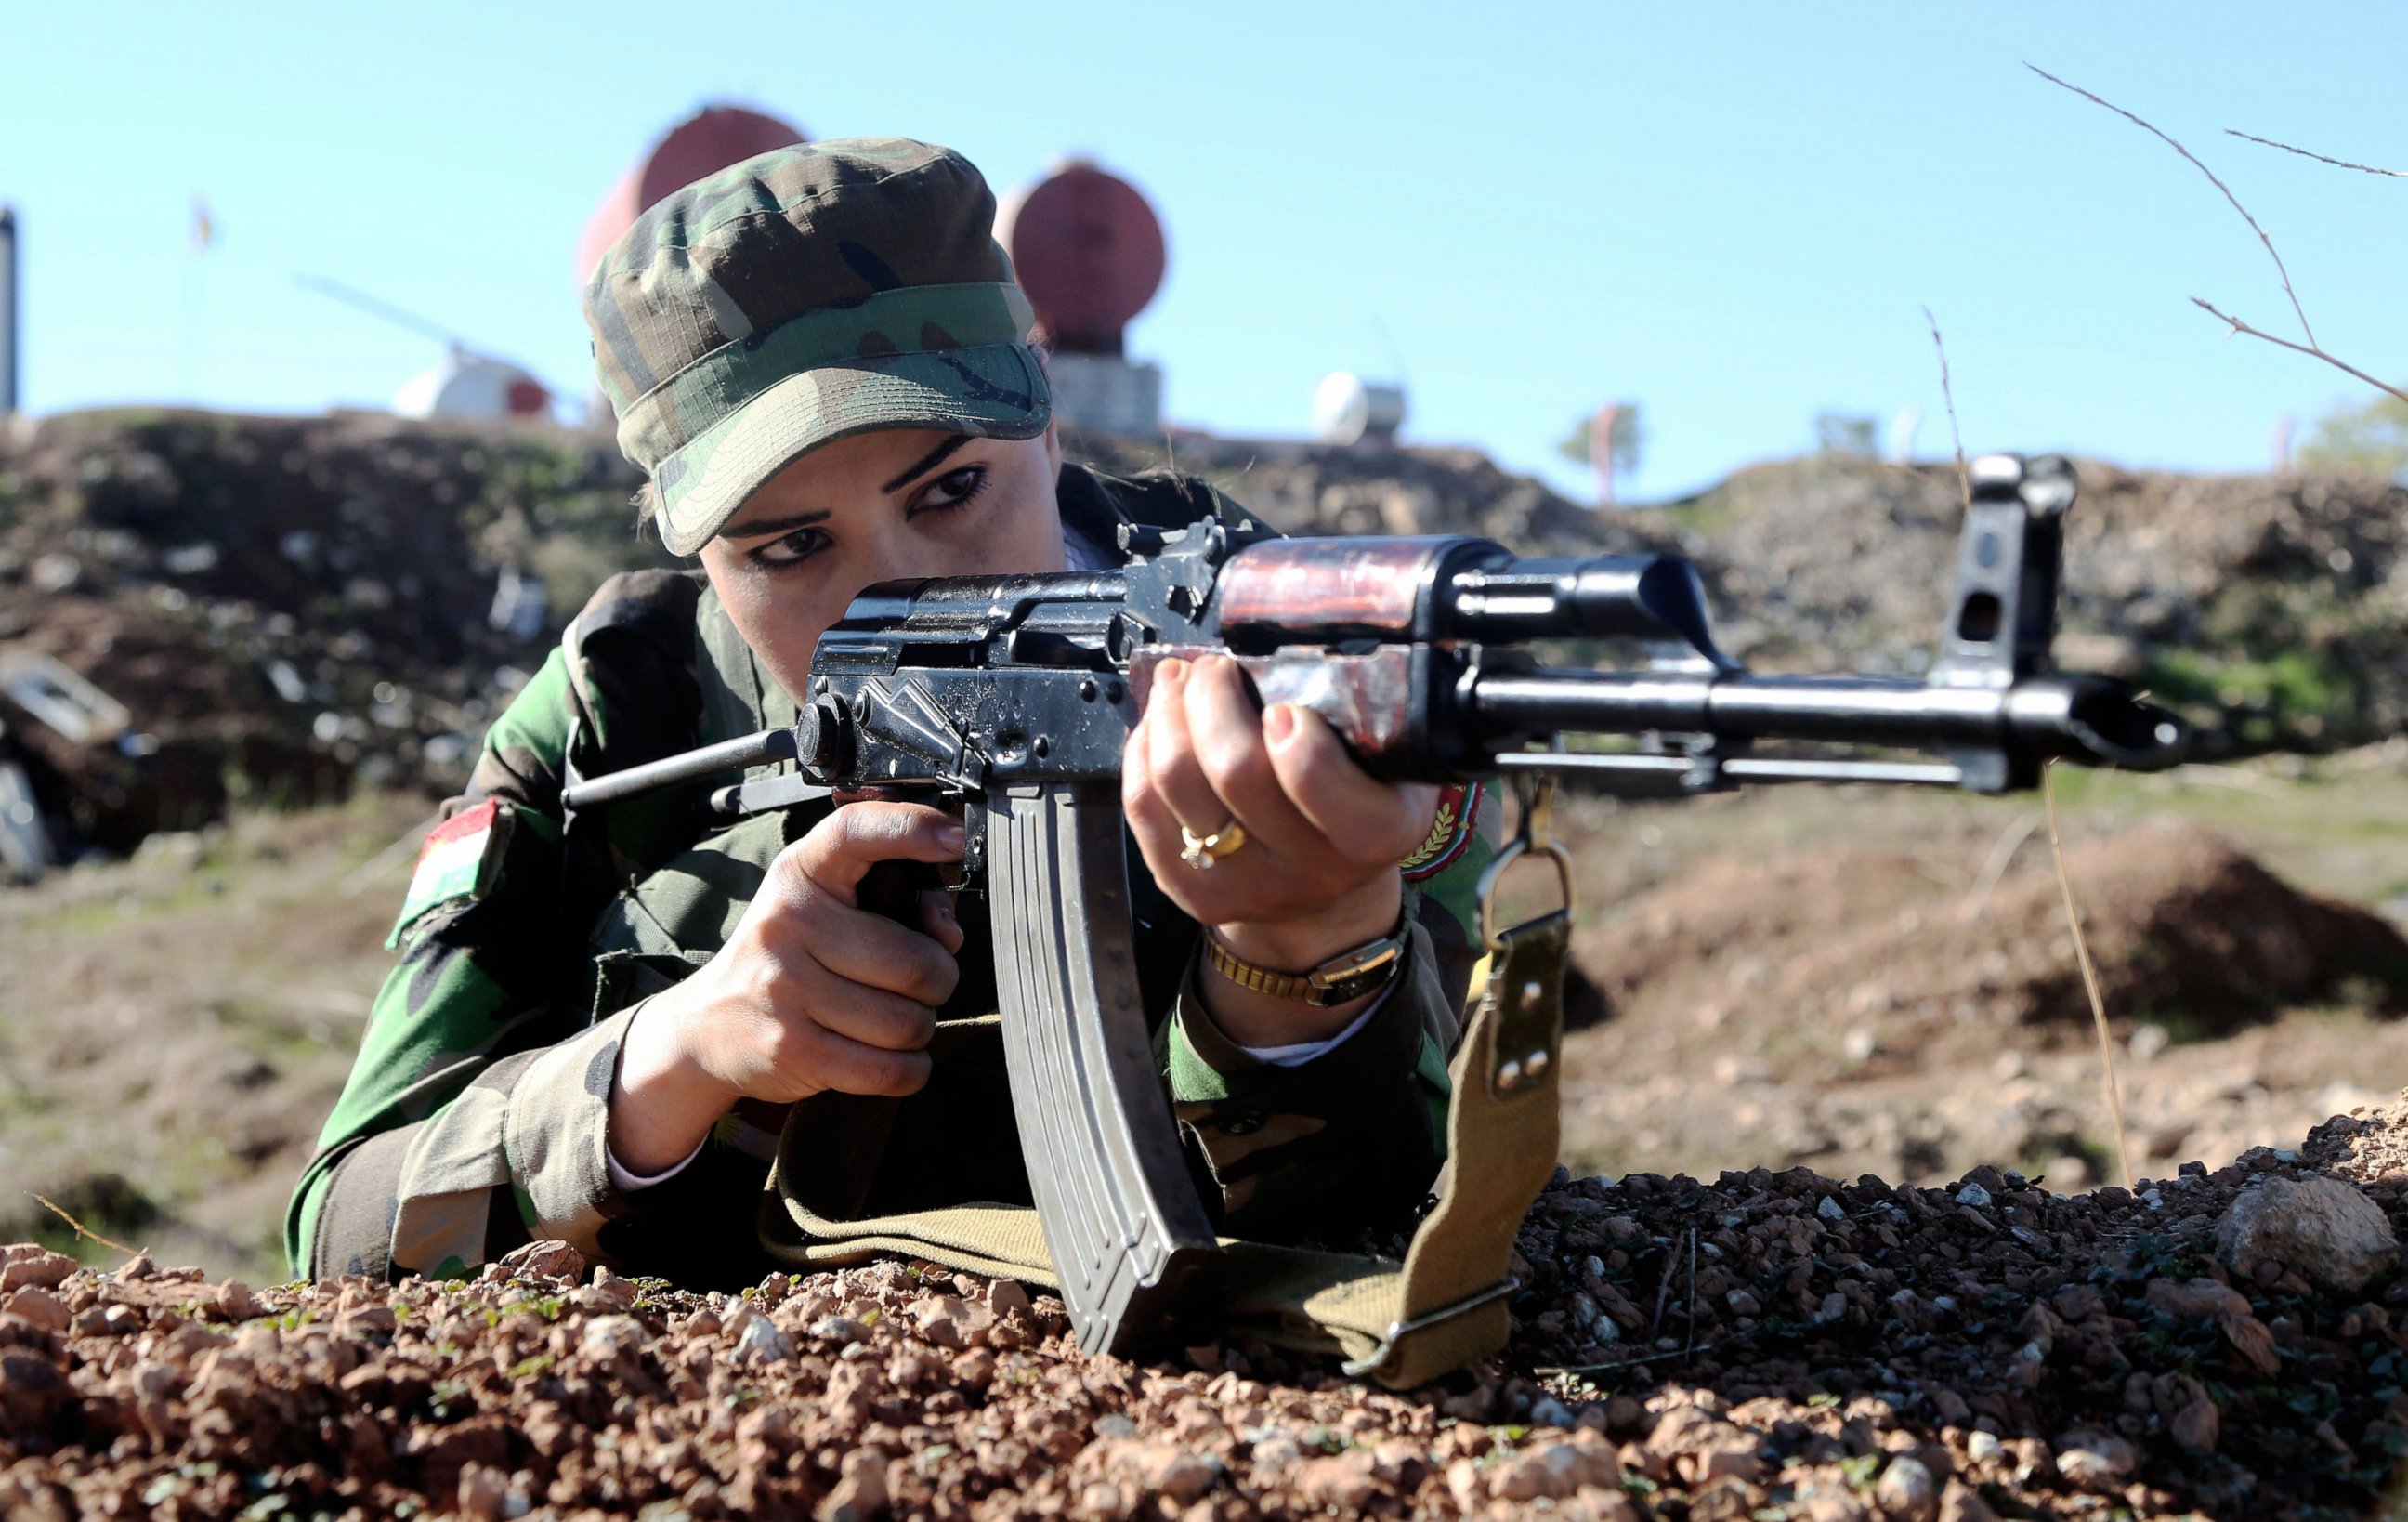 PHOTO:A female fighters aims her rifle as part of the Syrian Peshmerga fighters training to fight against Daesh and Assad forces at a camp located in Old Mosul region of the city of Nineveh, Iraq, Dec. 9, 2015.  